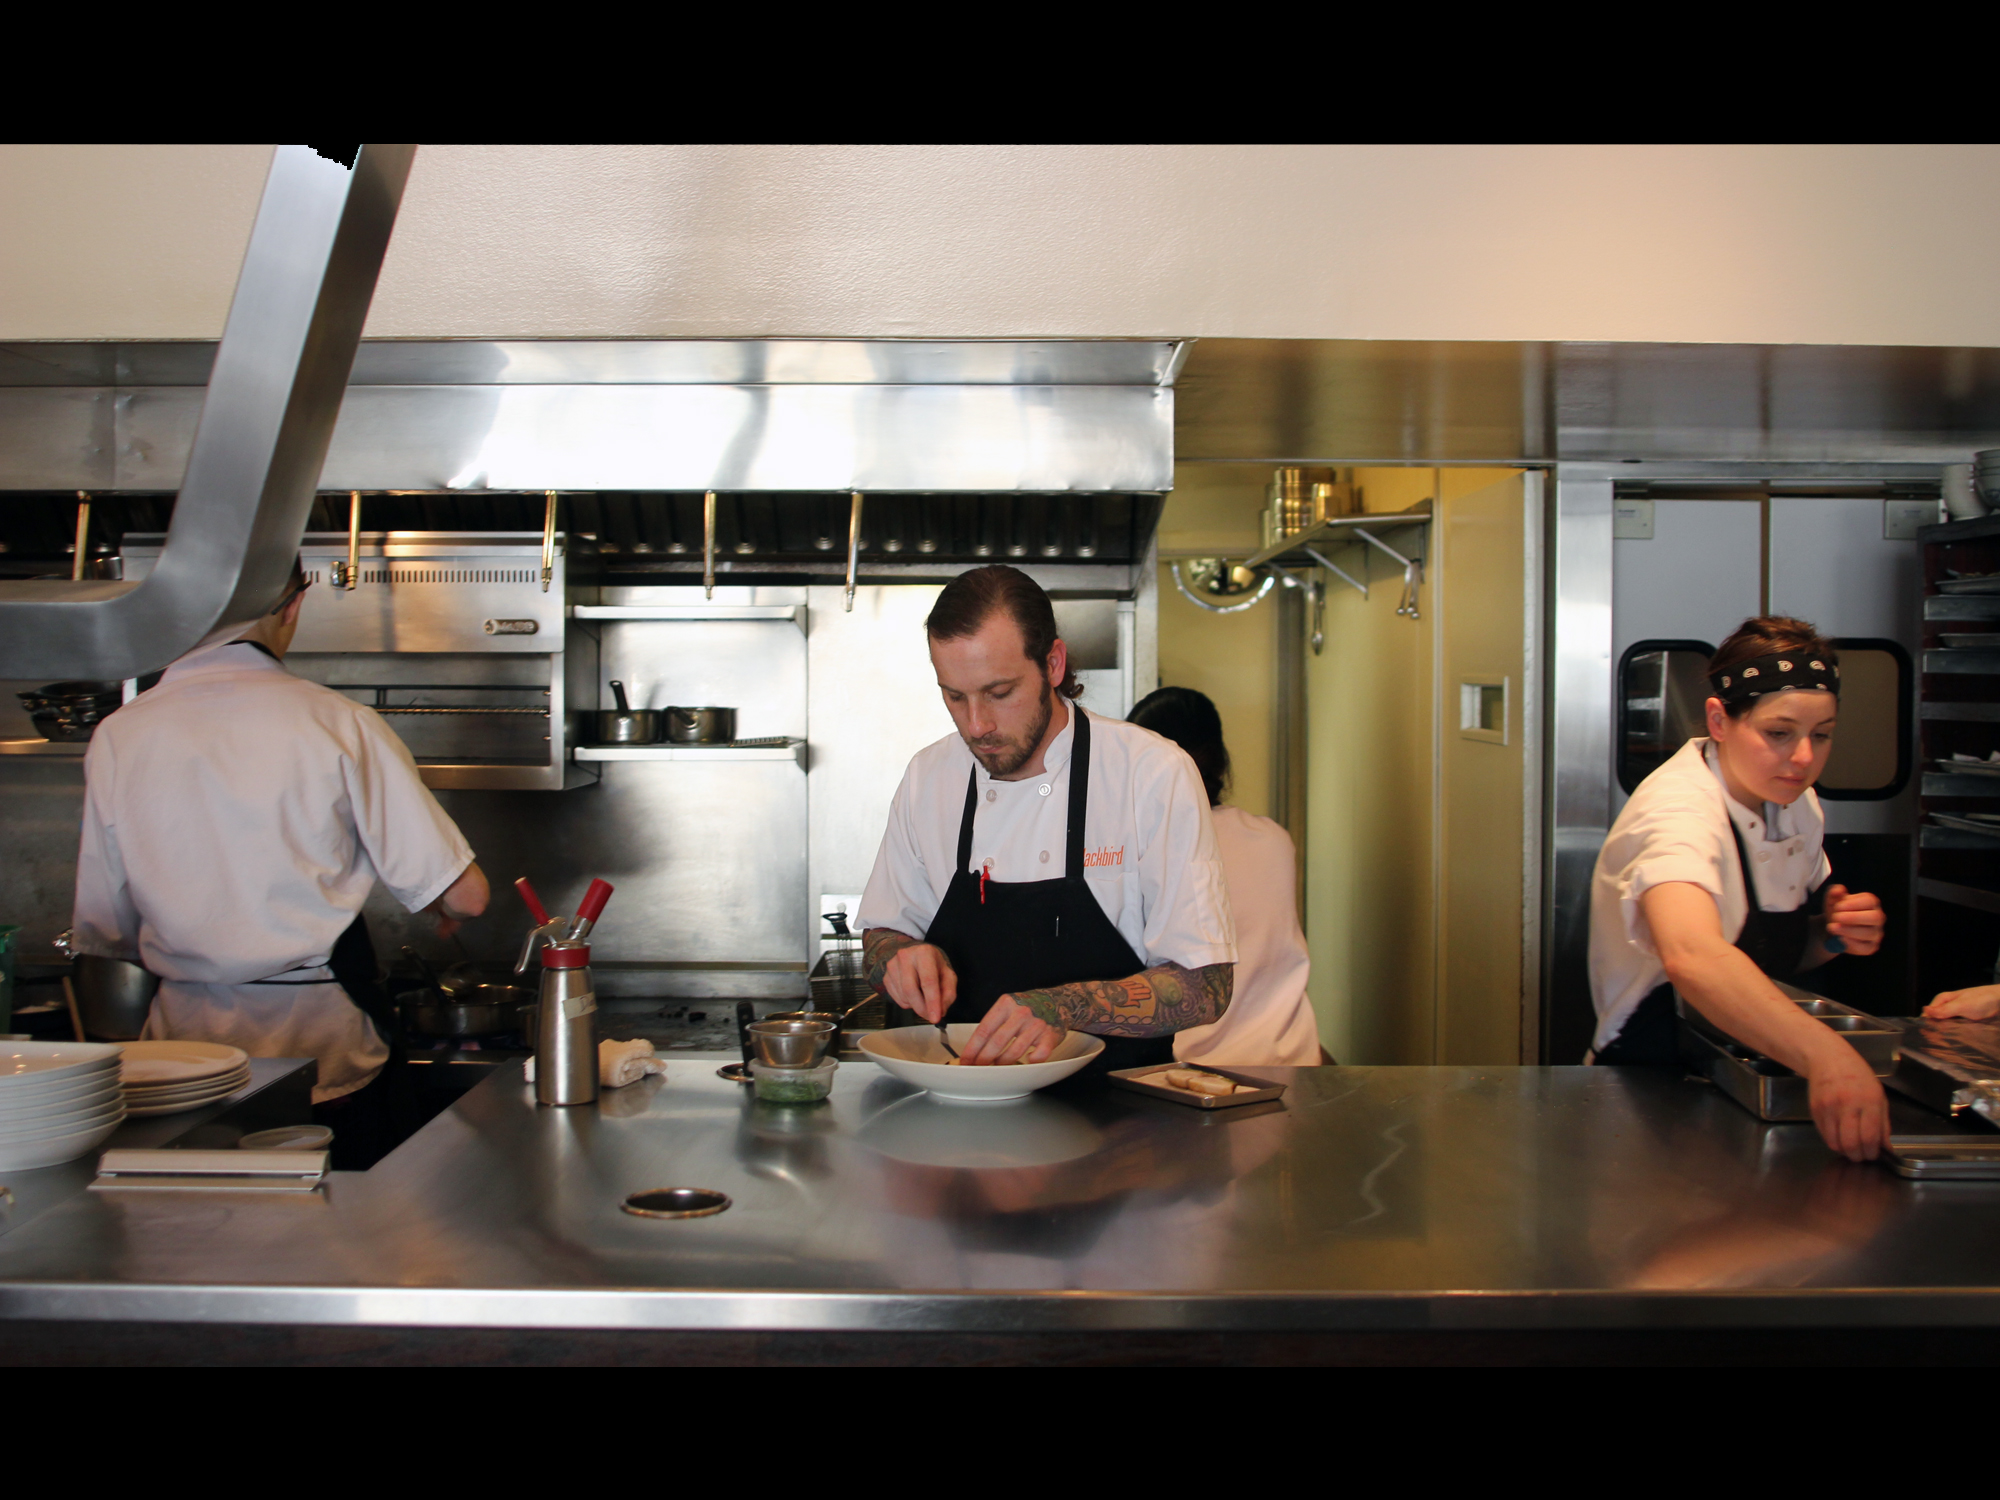 BLACKBIRD IS ONE OF THE CITY’S TOP KITCHENS. AND NOW, IT’S RYAN PFEIFFER’S